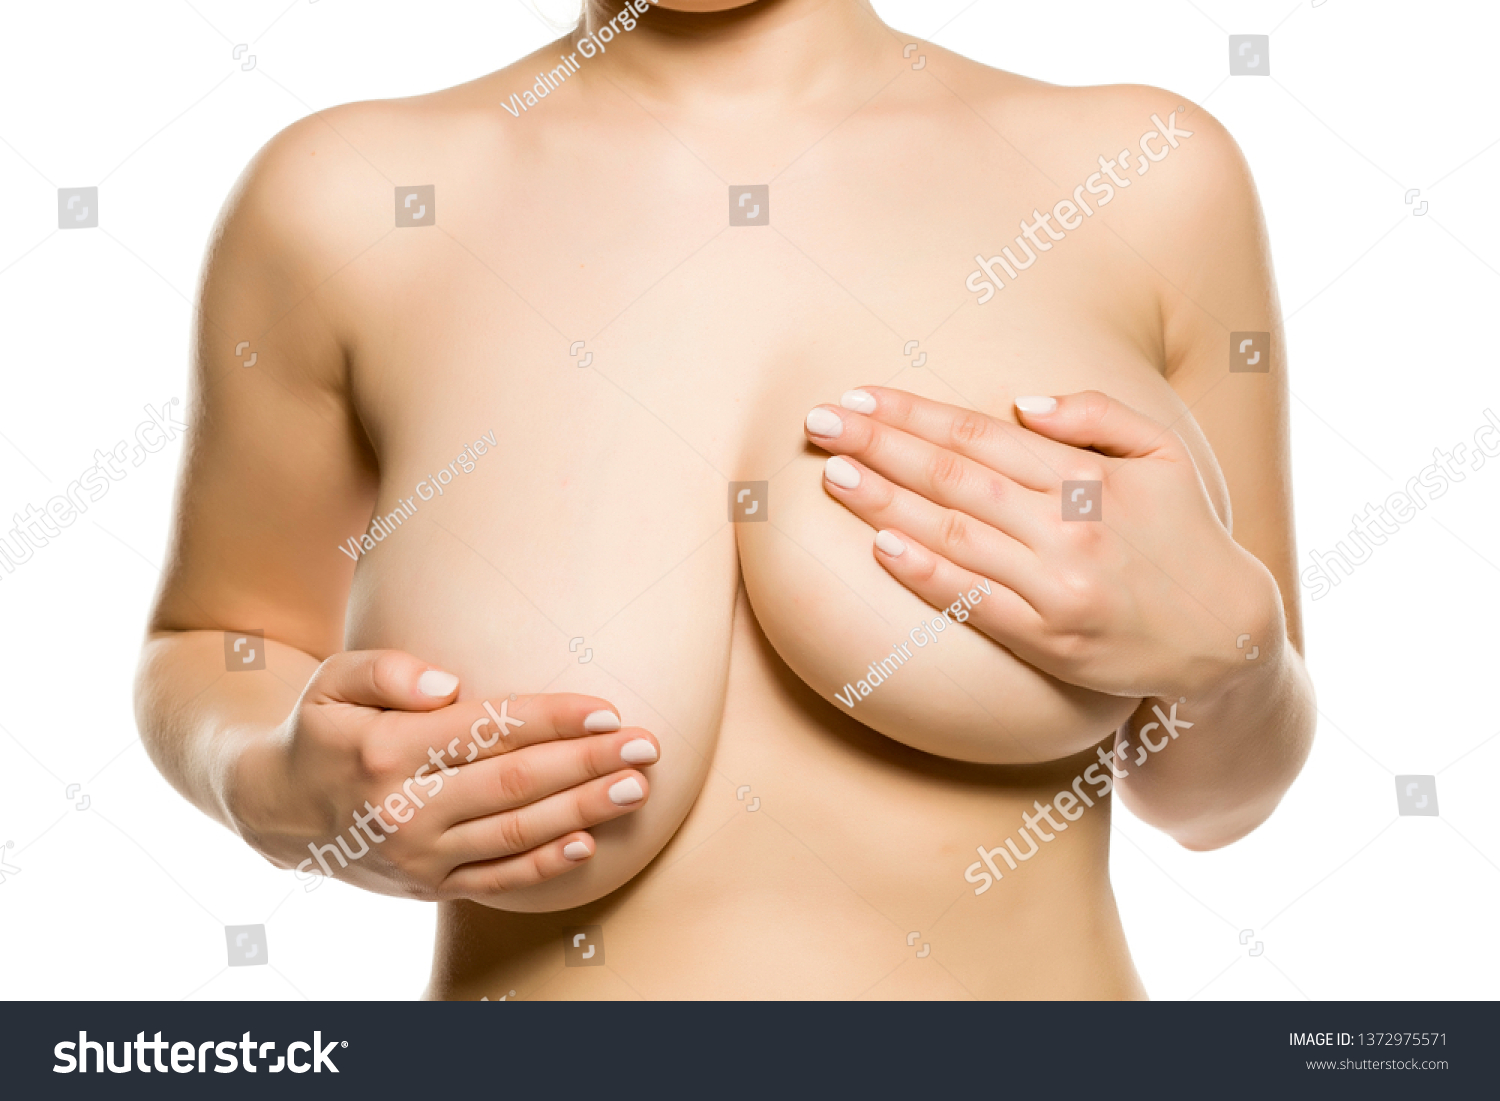 Woman Univen Big Breasts On White Stock Photo 1372975571 Shutterstock pic